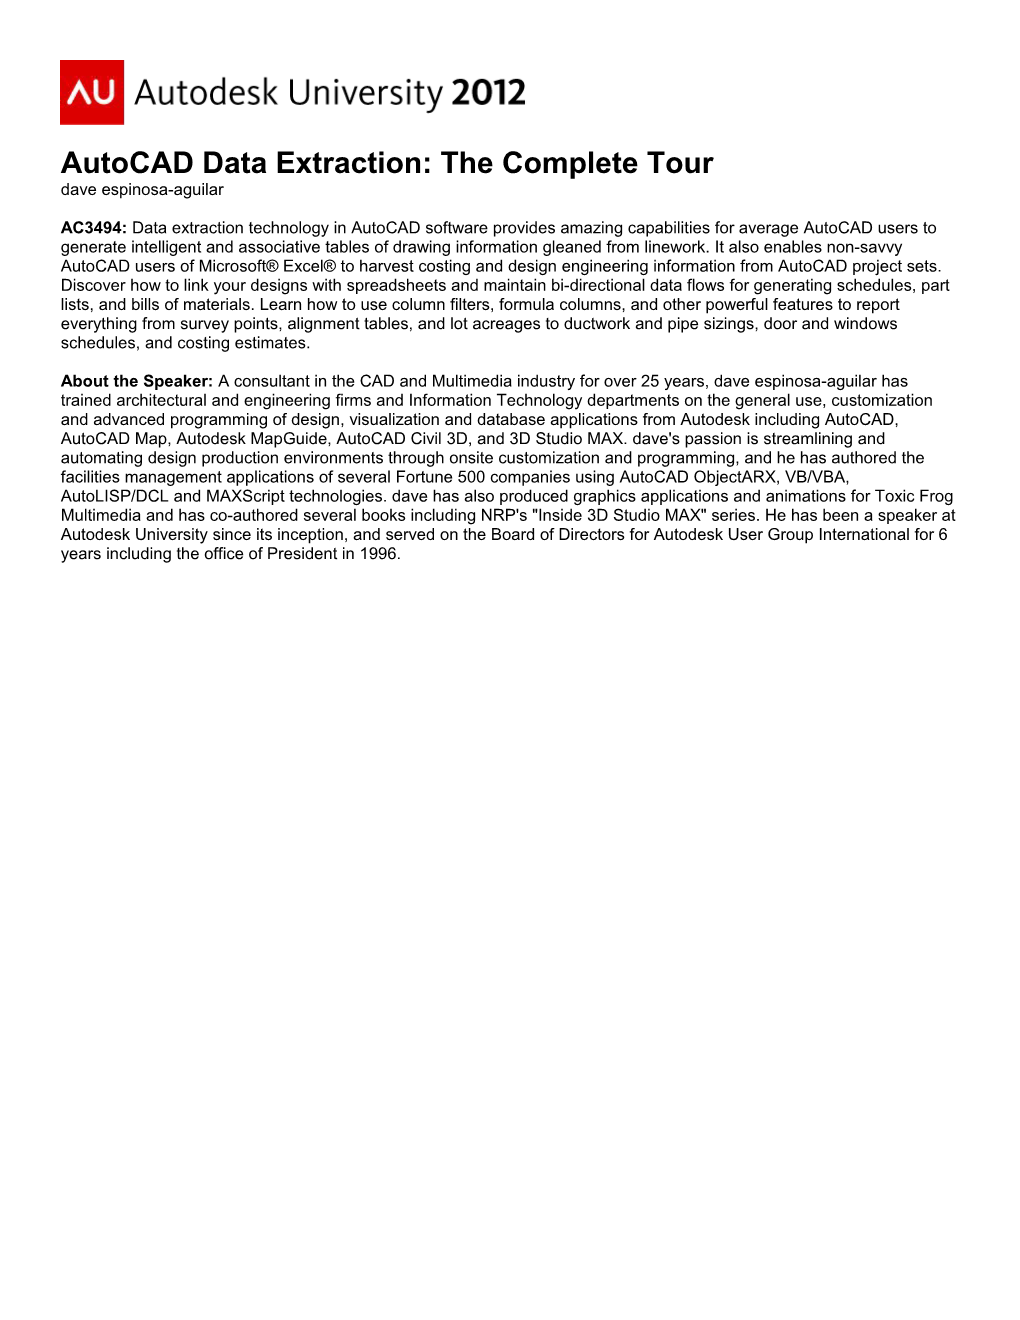 Autocad Data Extraction: the Complete Tour